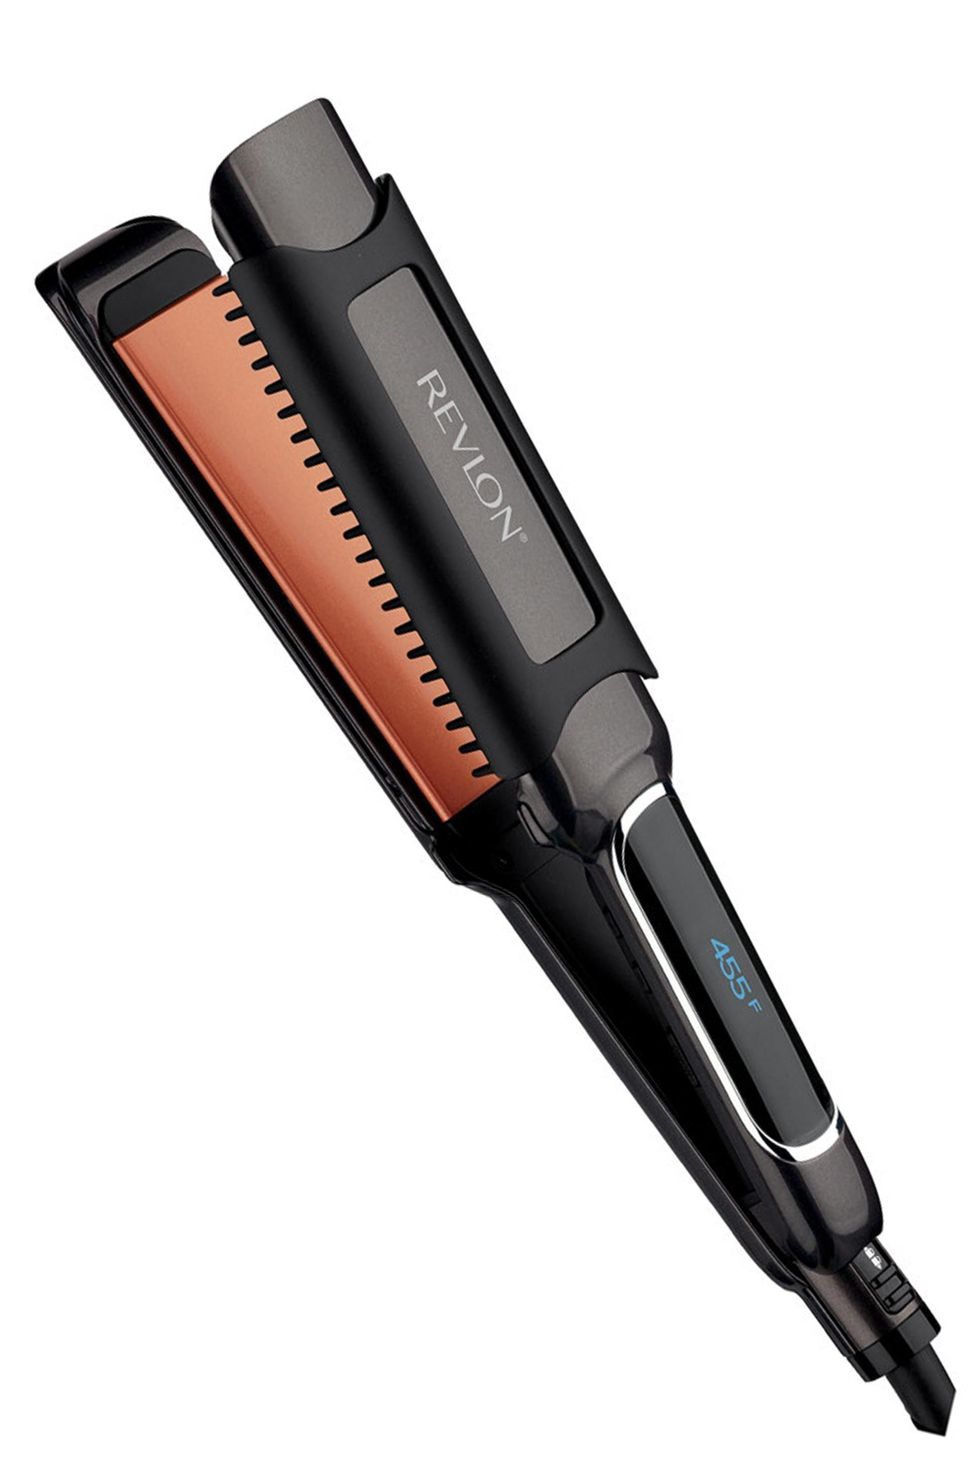 Top-rated Hair Straighteners For Fine Hair